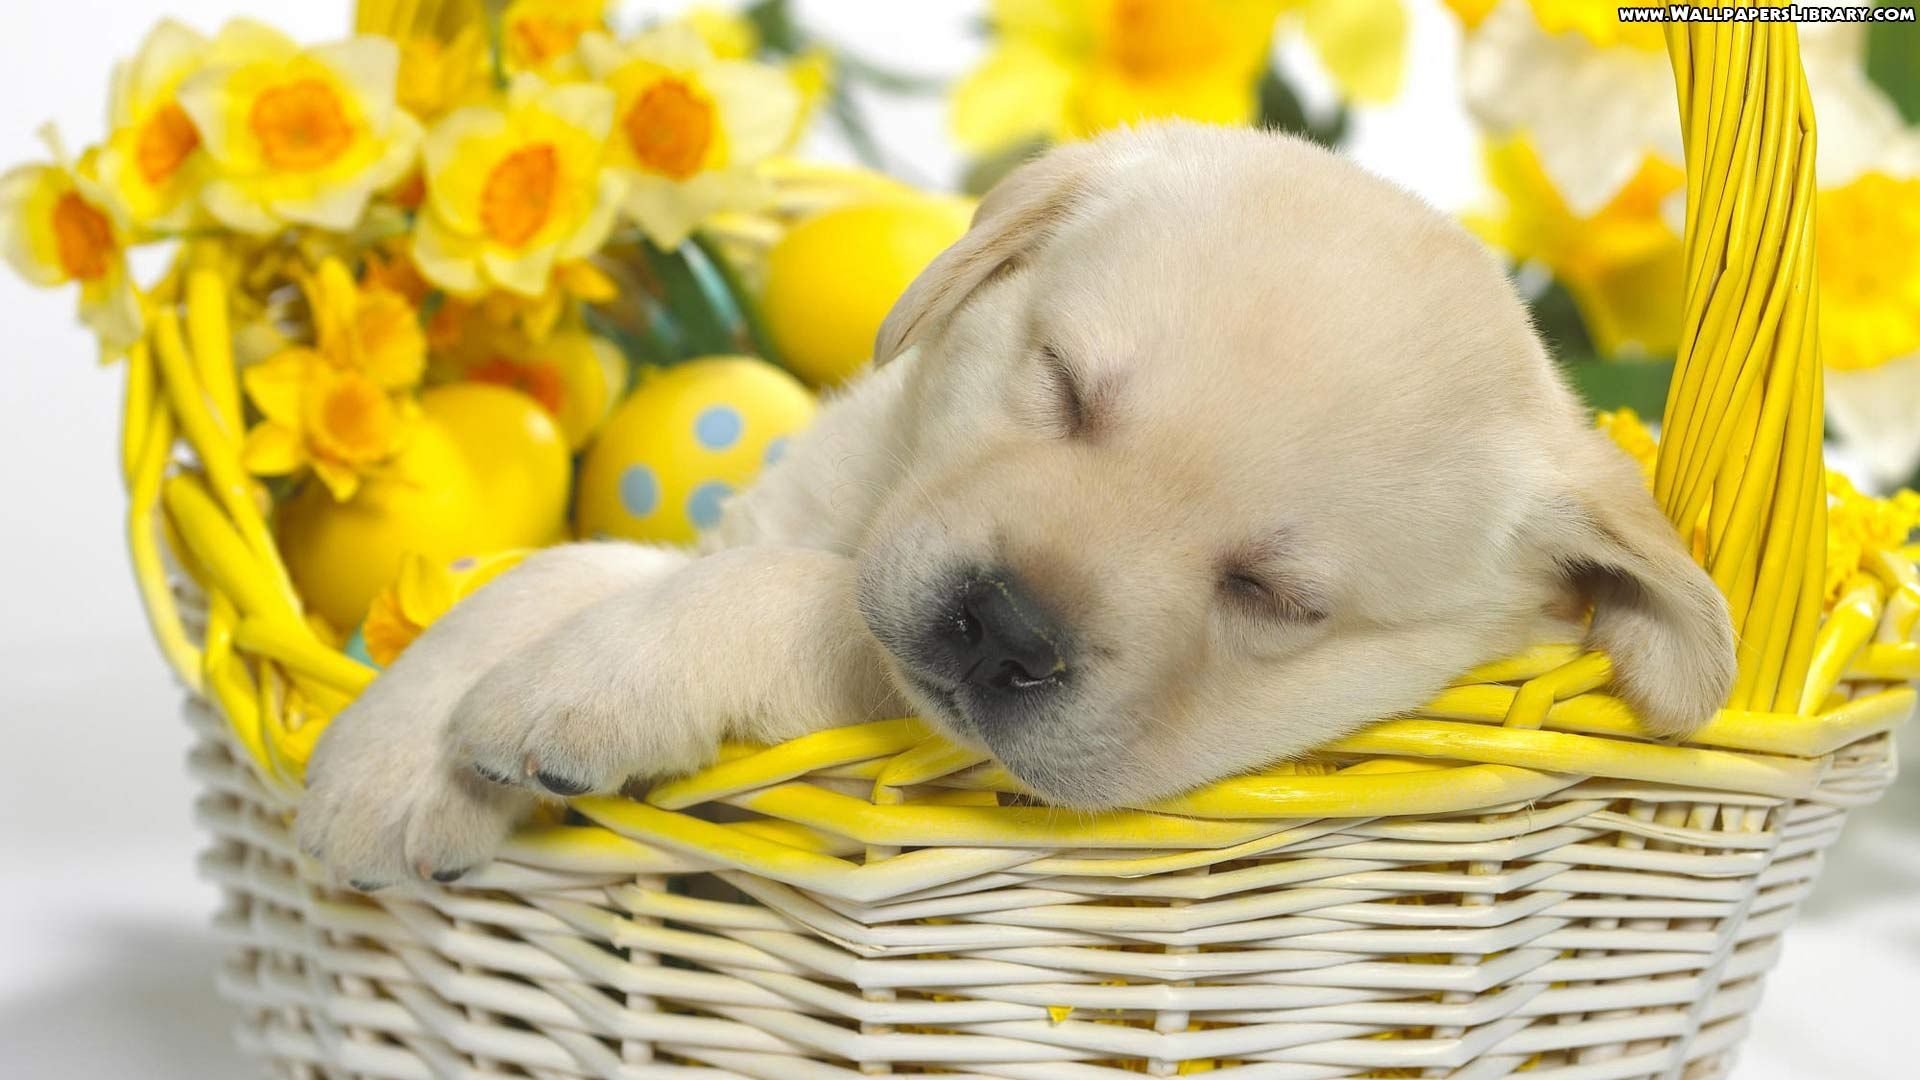 Easter Puppy Wallpaper. Sleeping puppies, Cute dogs, Puppies